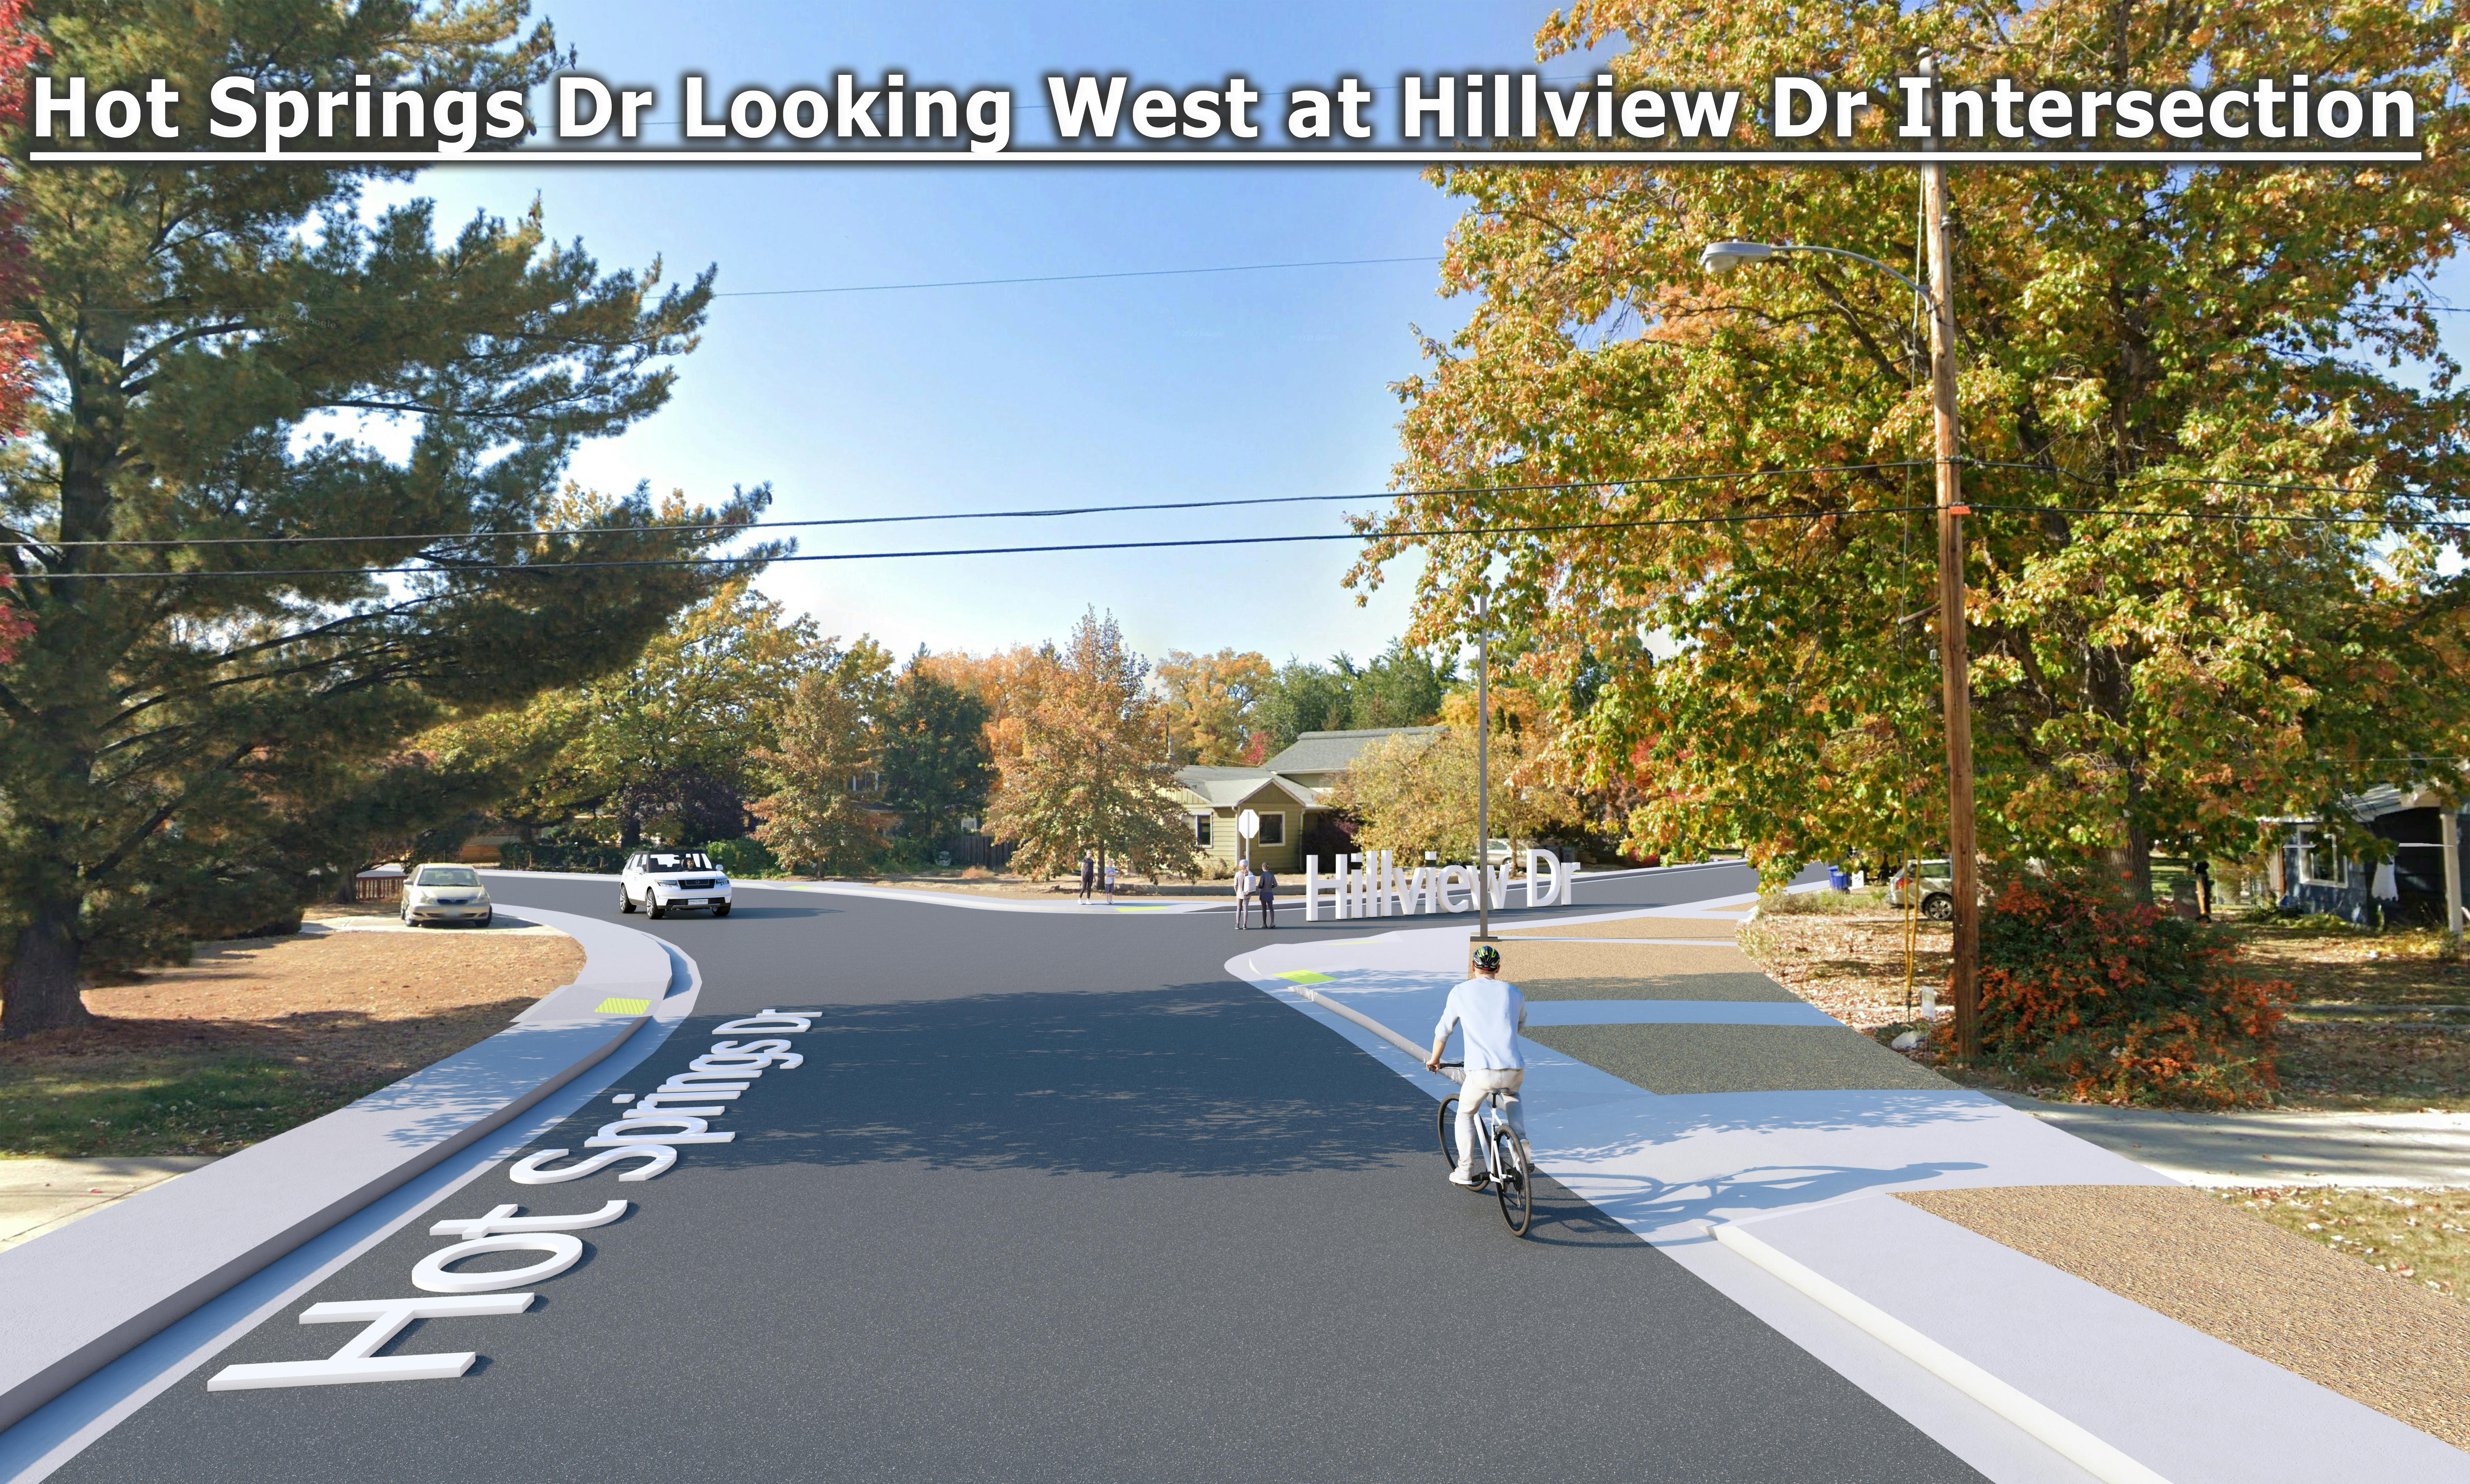 Hot Springs and Hillview Intersection West streetview .jpg